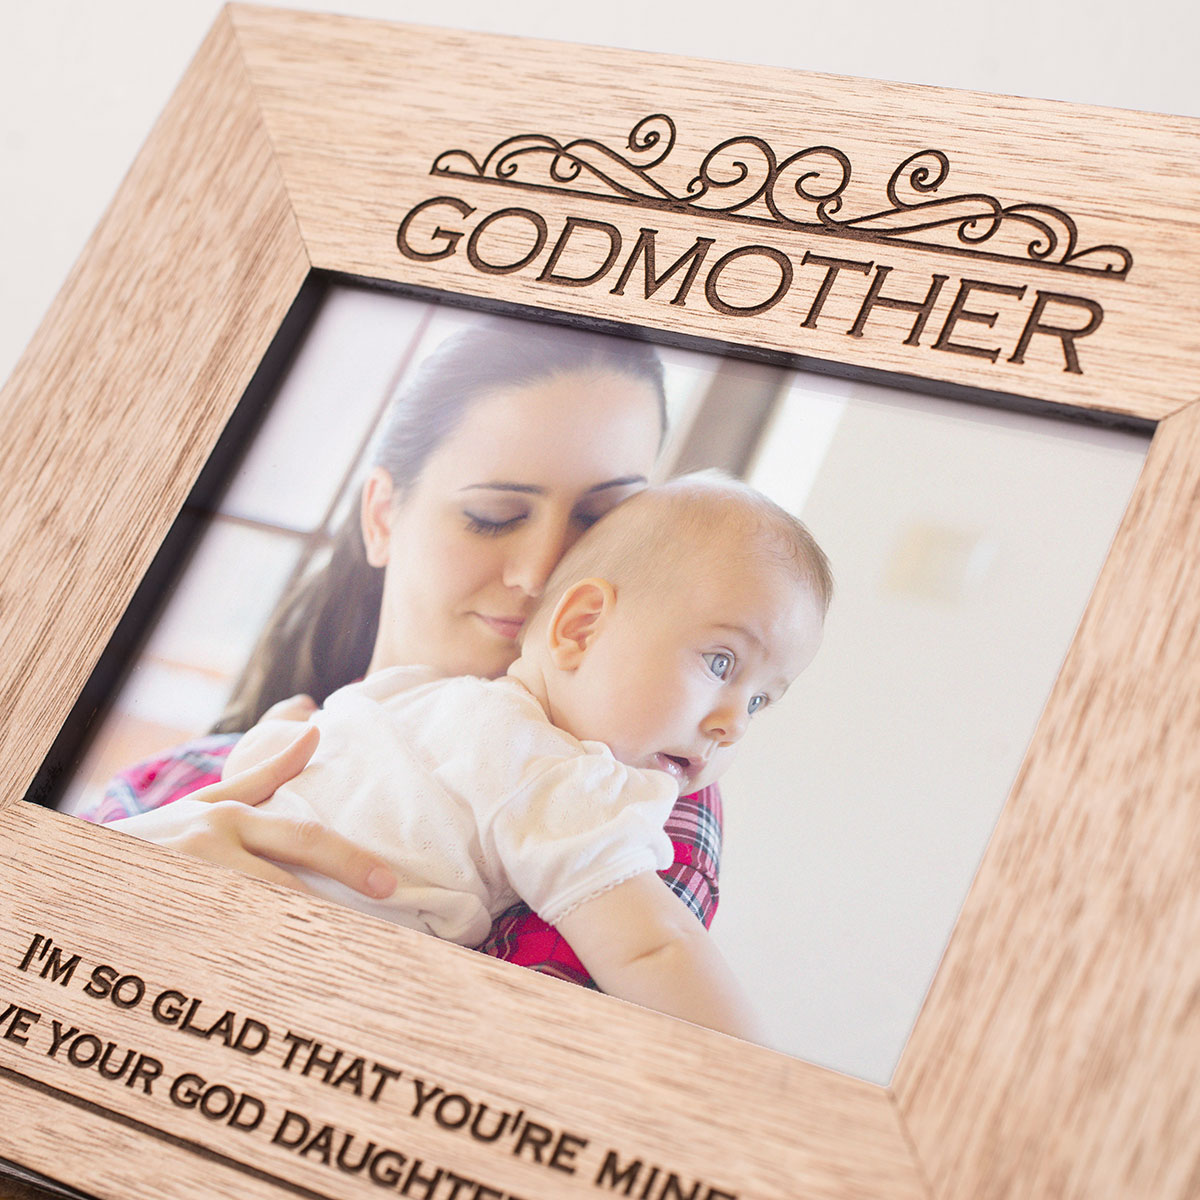 Personalised Engraved Wooden Photo Frame - Godmother